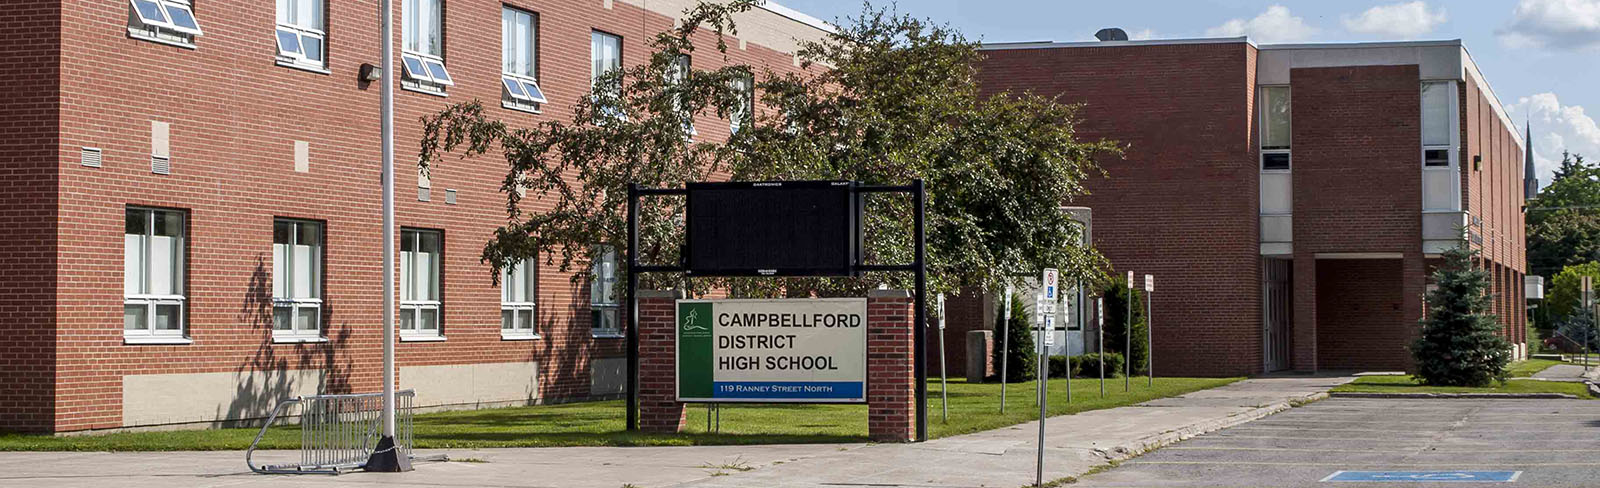 image of Campbellford District High School